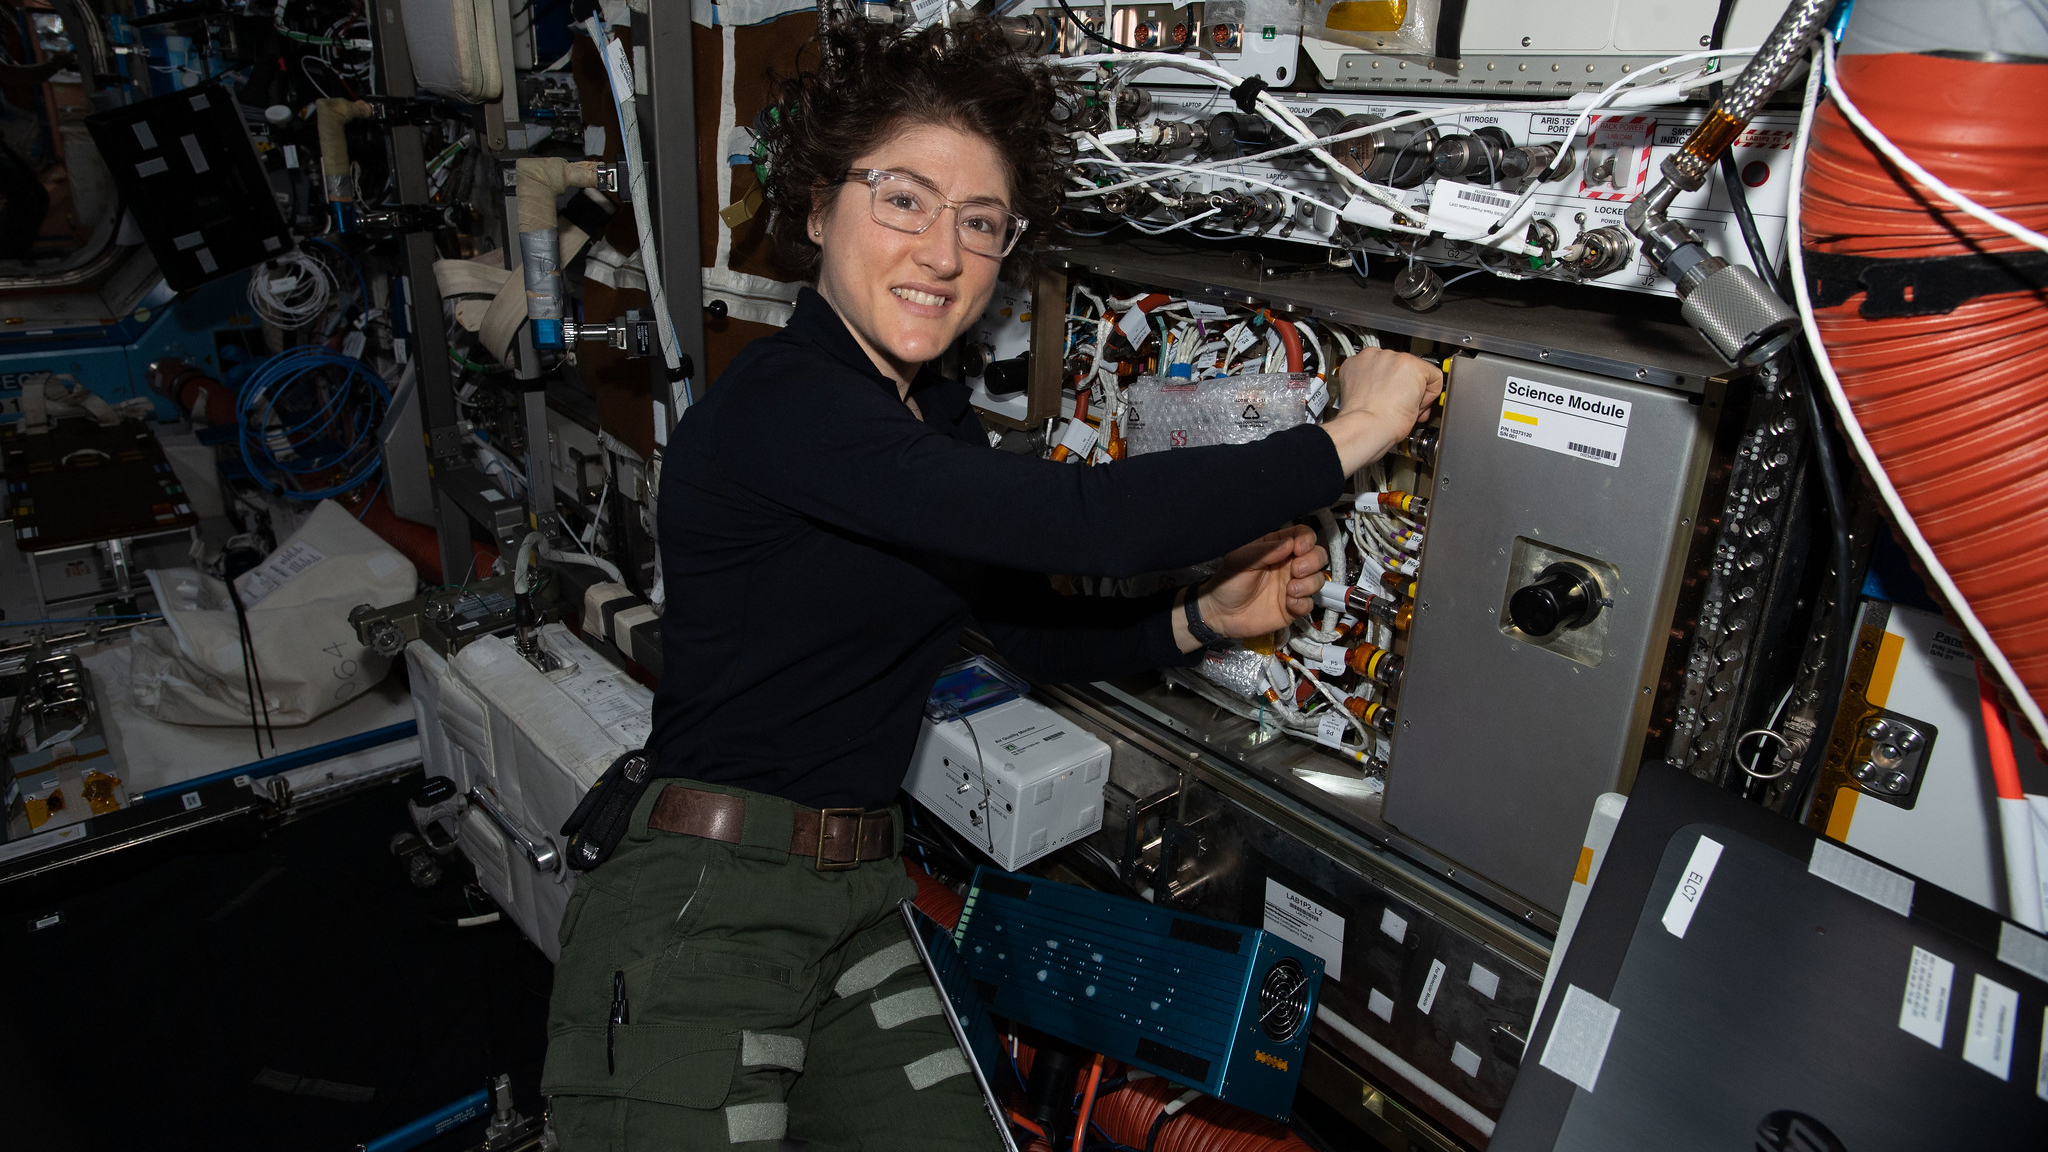 NASA astronaut and Expedition 61 Flight Engineer Christina Koch works on the Cold Atom Lab (CAL) swapping and cleaning hardware inside the quantum research device., on Jan. 28, 2020.